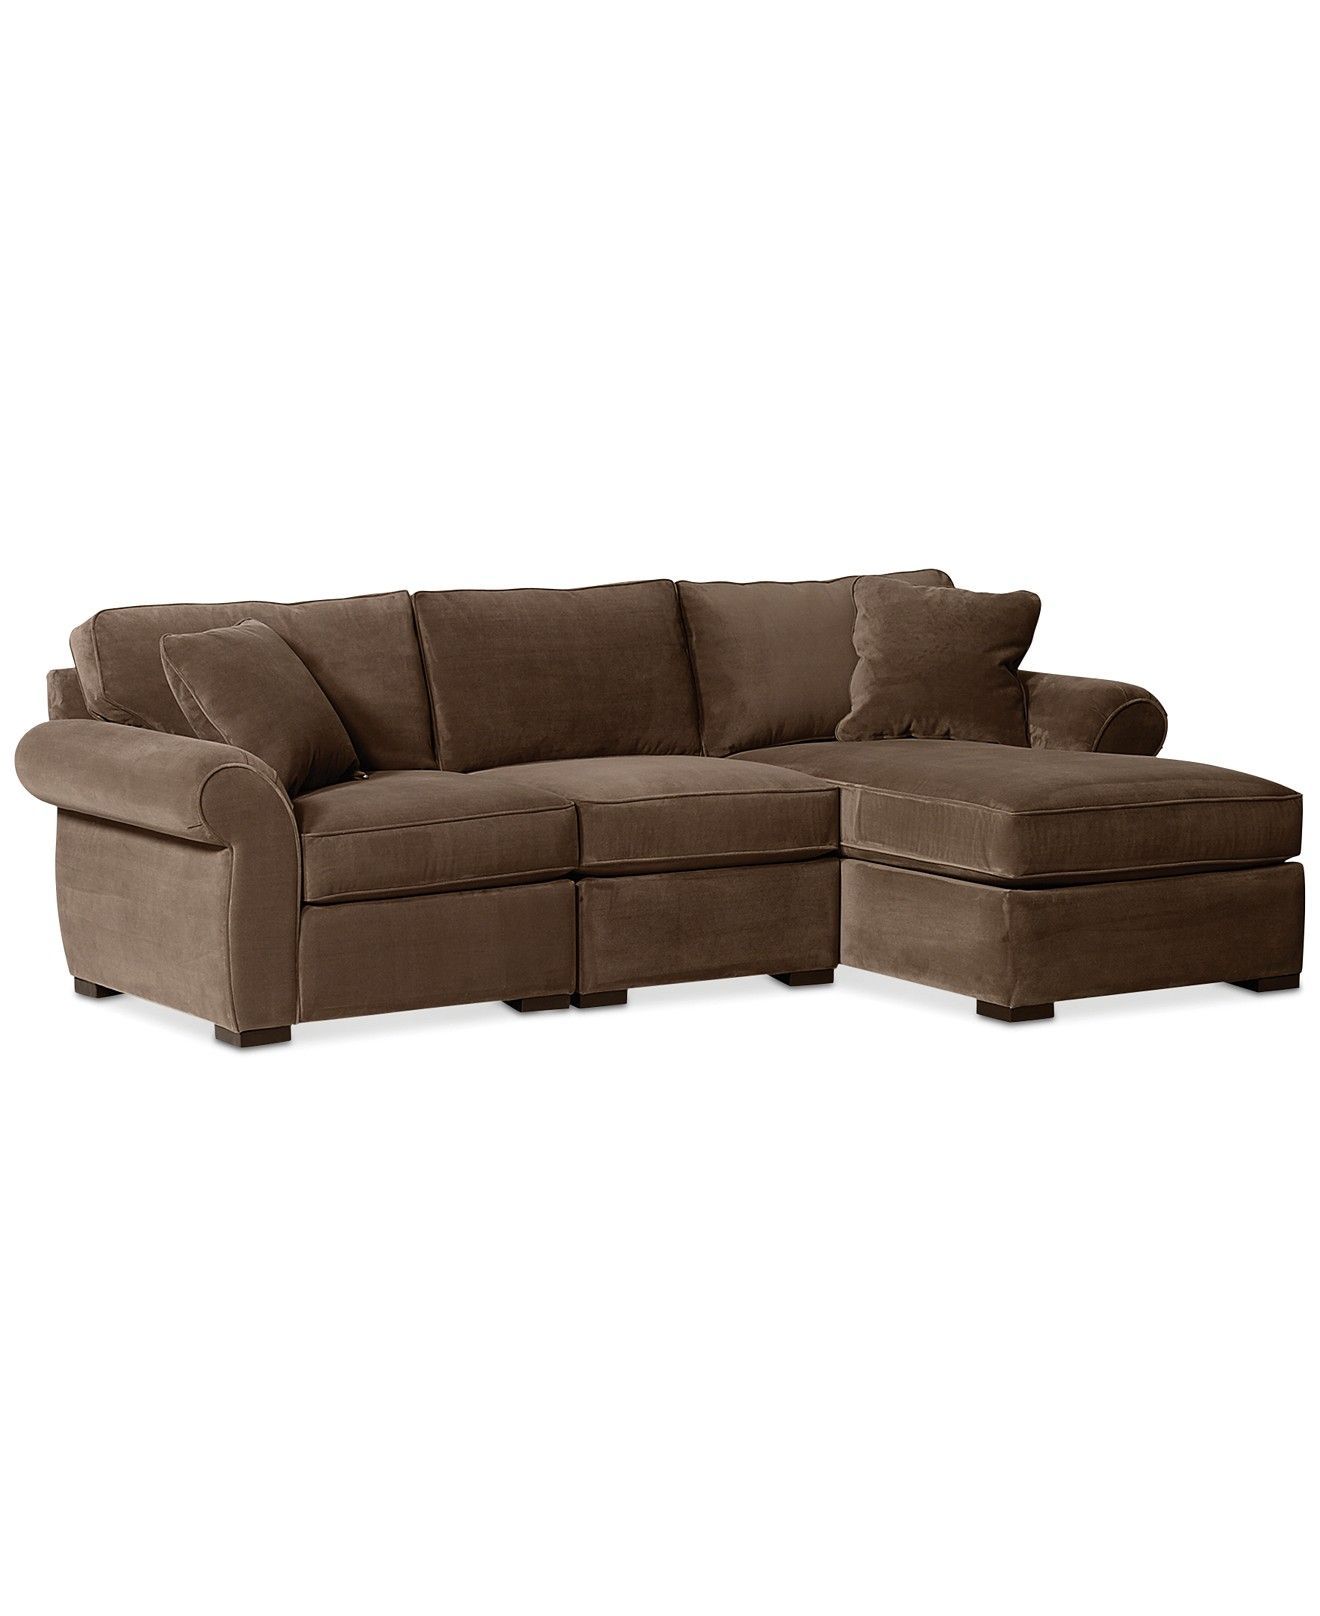 Trevor Fabric 3 Piece Chaise Sectional Sofa – Sectional Throughout Trevor Sofas (View 13 of 15)